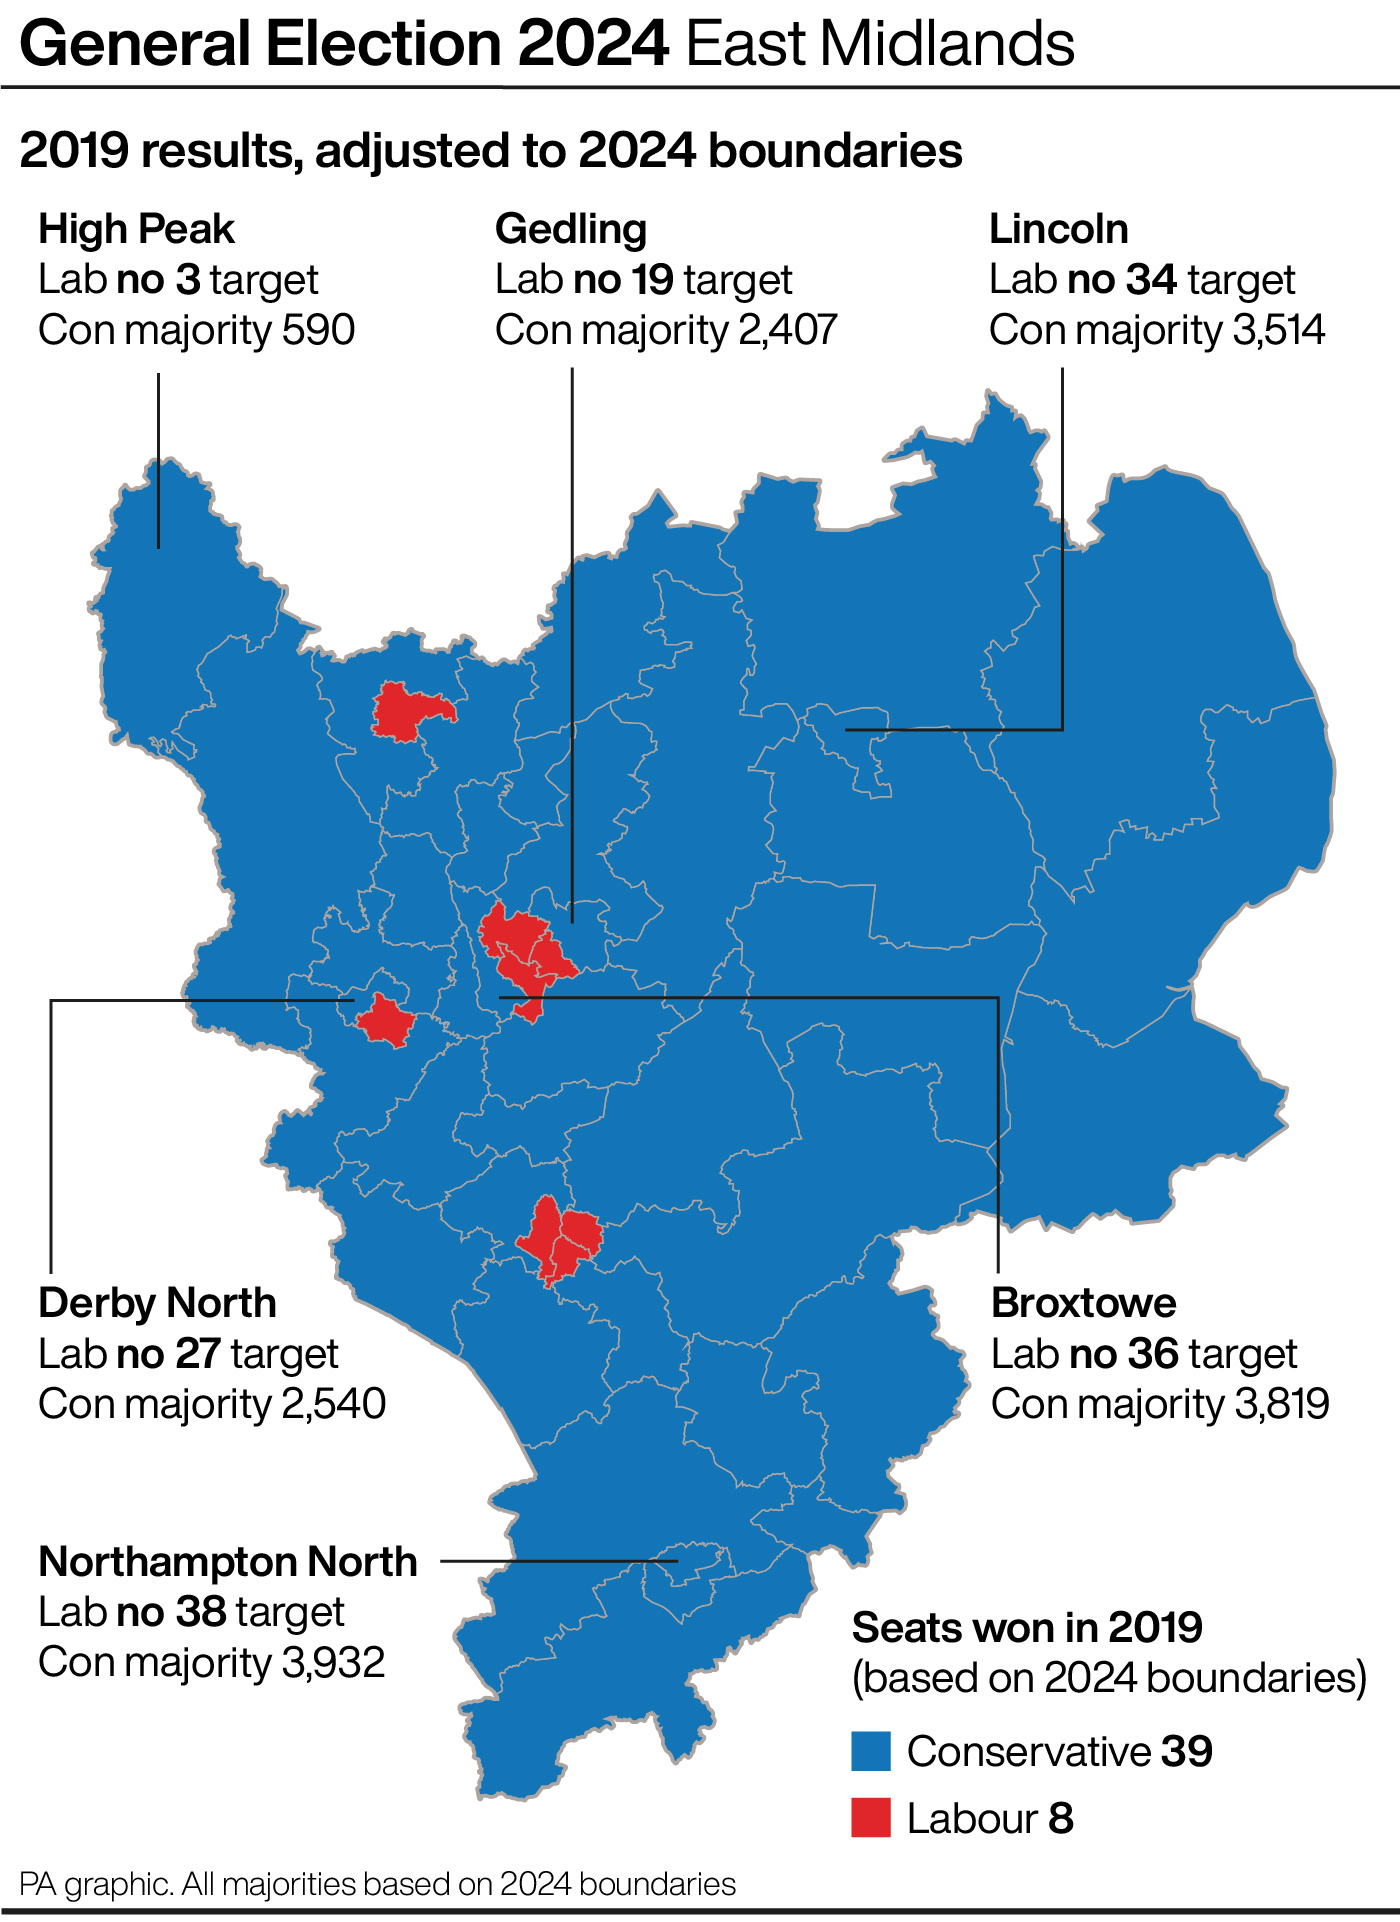 A nap showing some of the key battleground seats in the East Midlands at the General Election